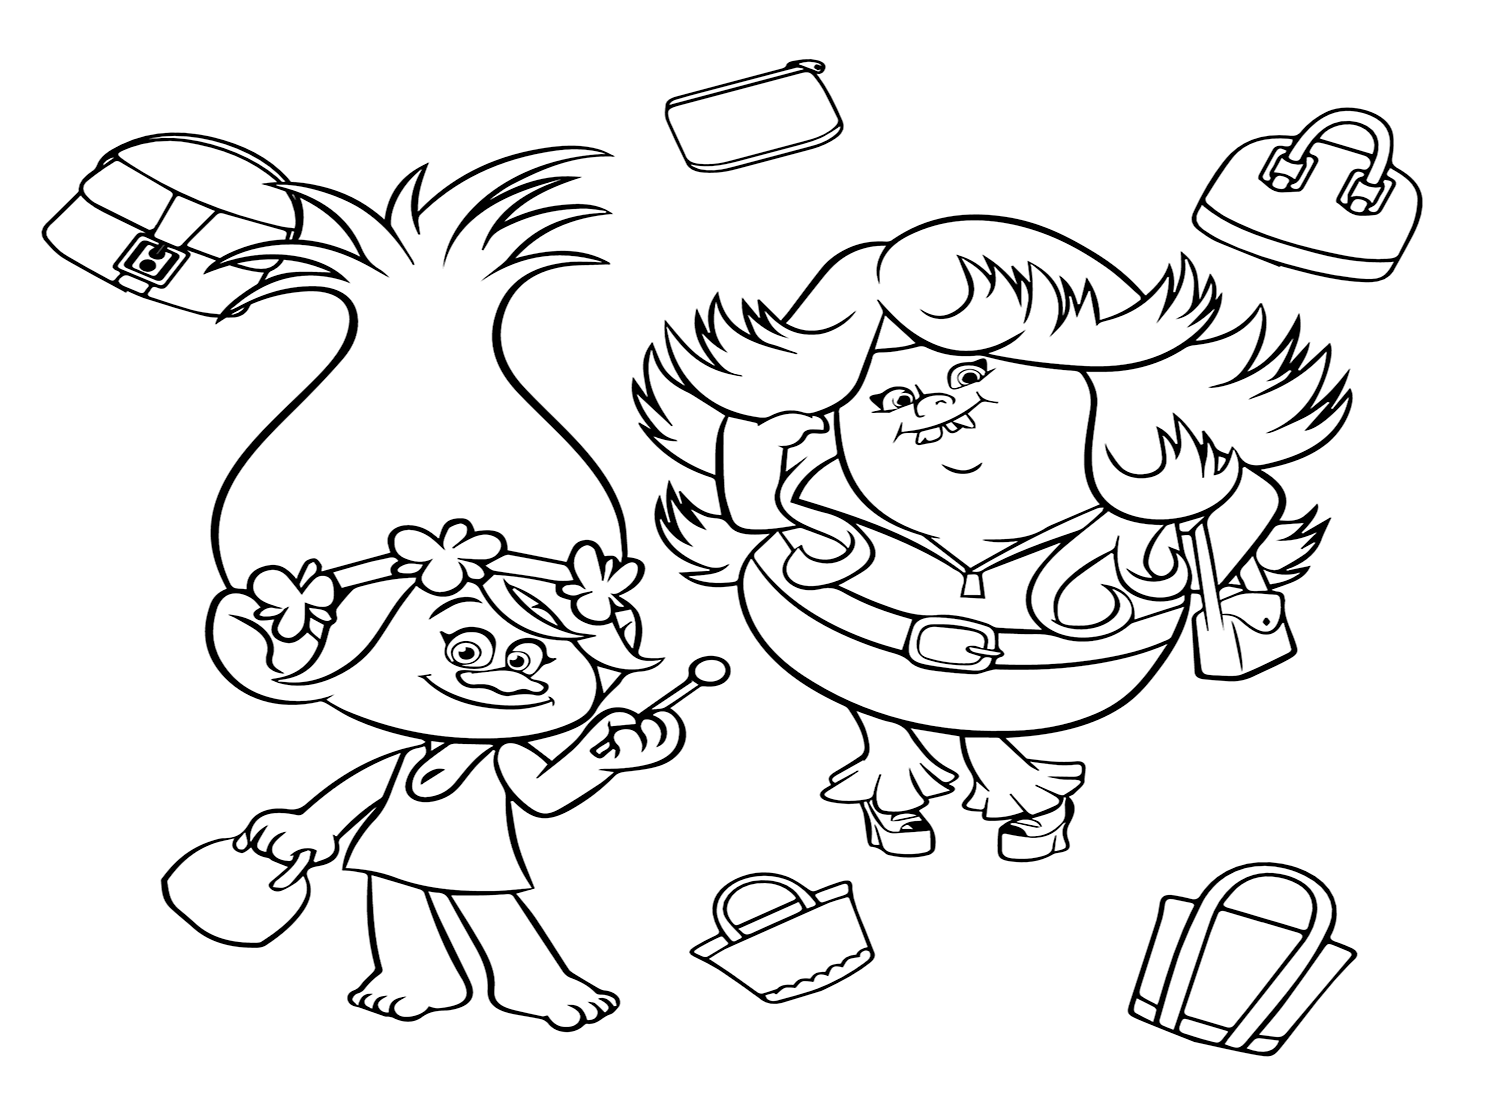 Trolls World Tour to Print Coloring Pages